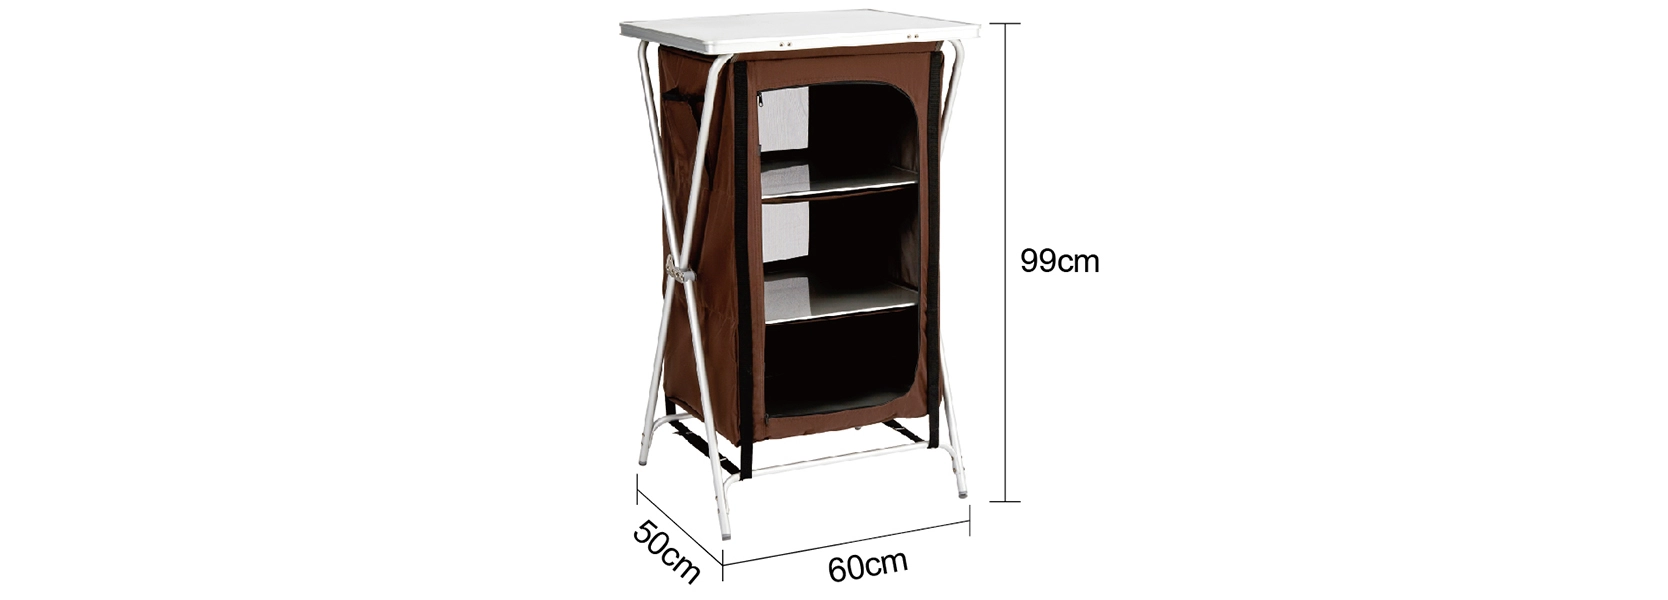 details of Outdoor Foldable Cupboards & Camping Cabinet for camp kitchen use